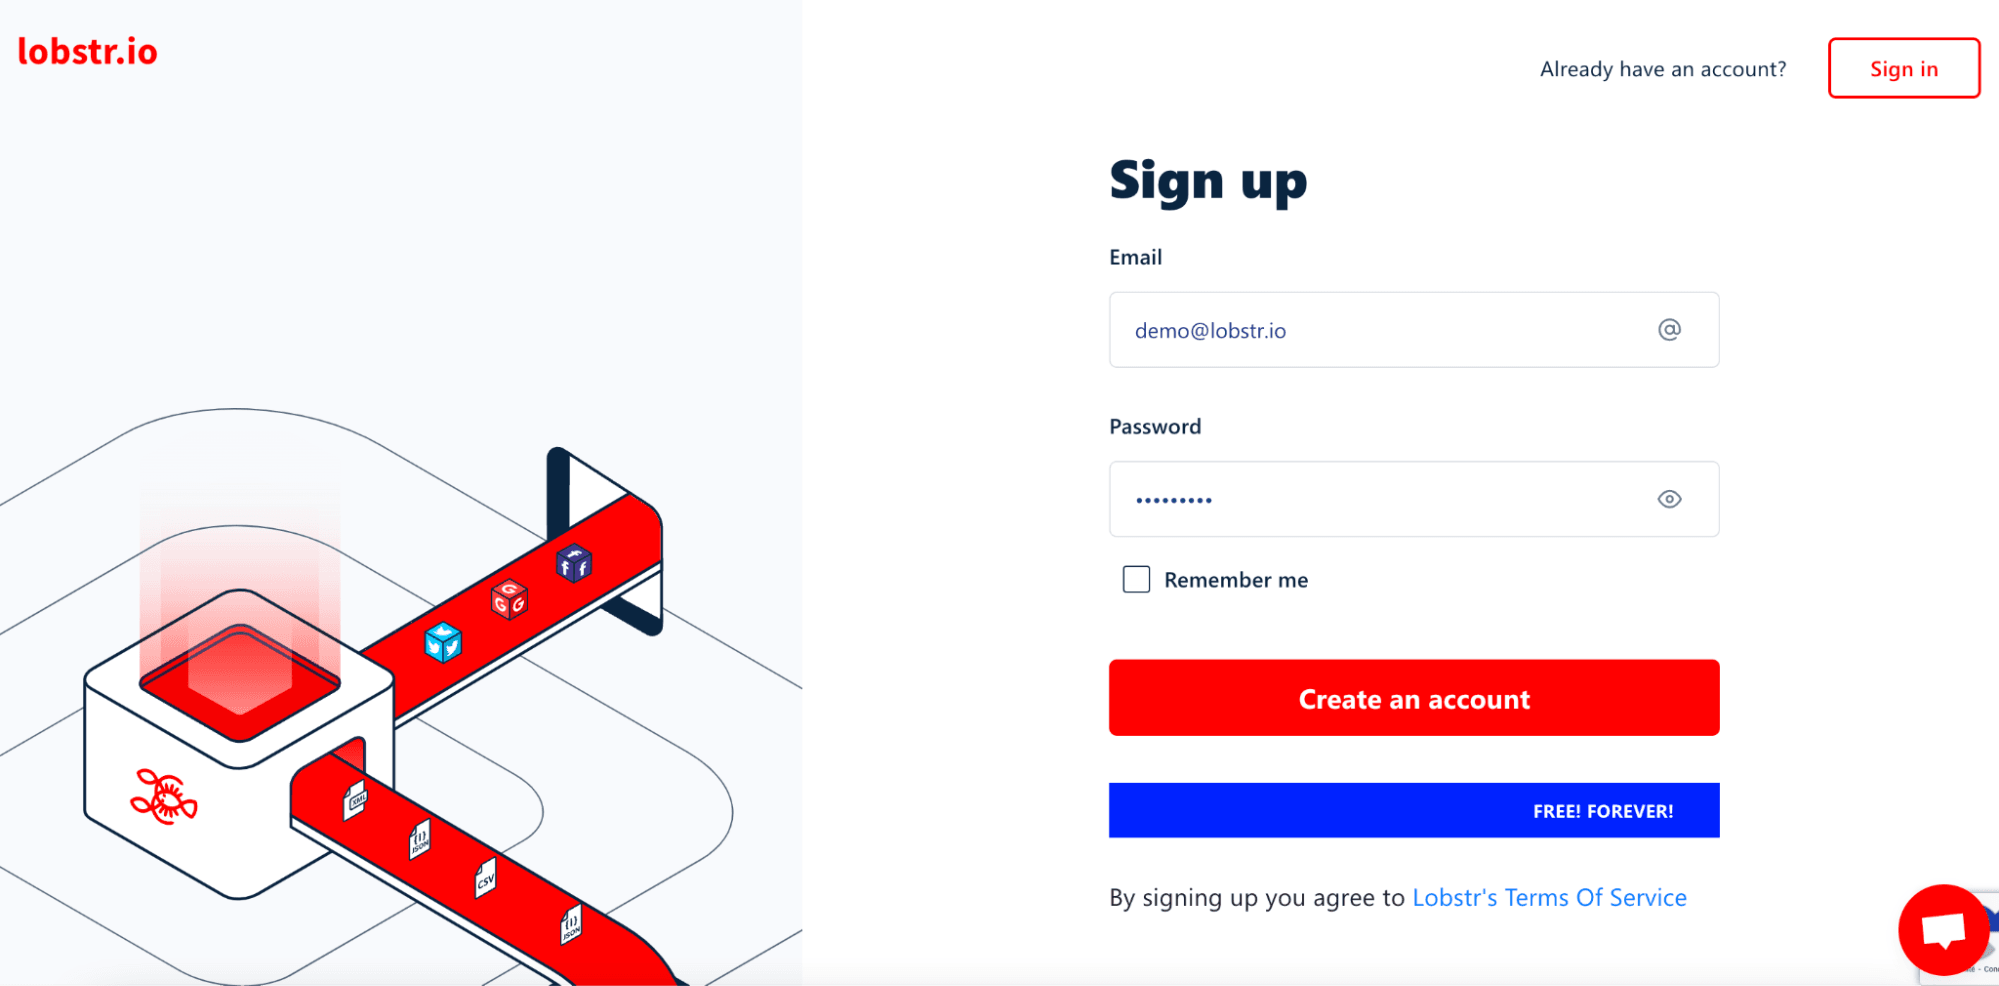 sign up lobstr io - image15.png